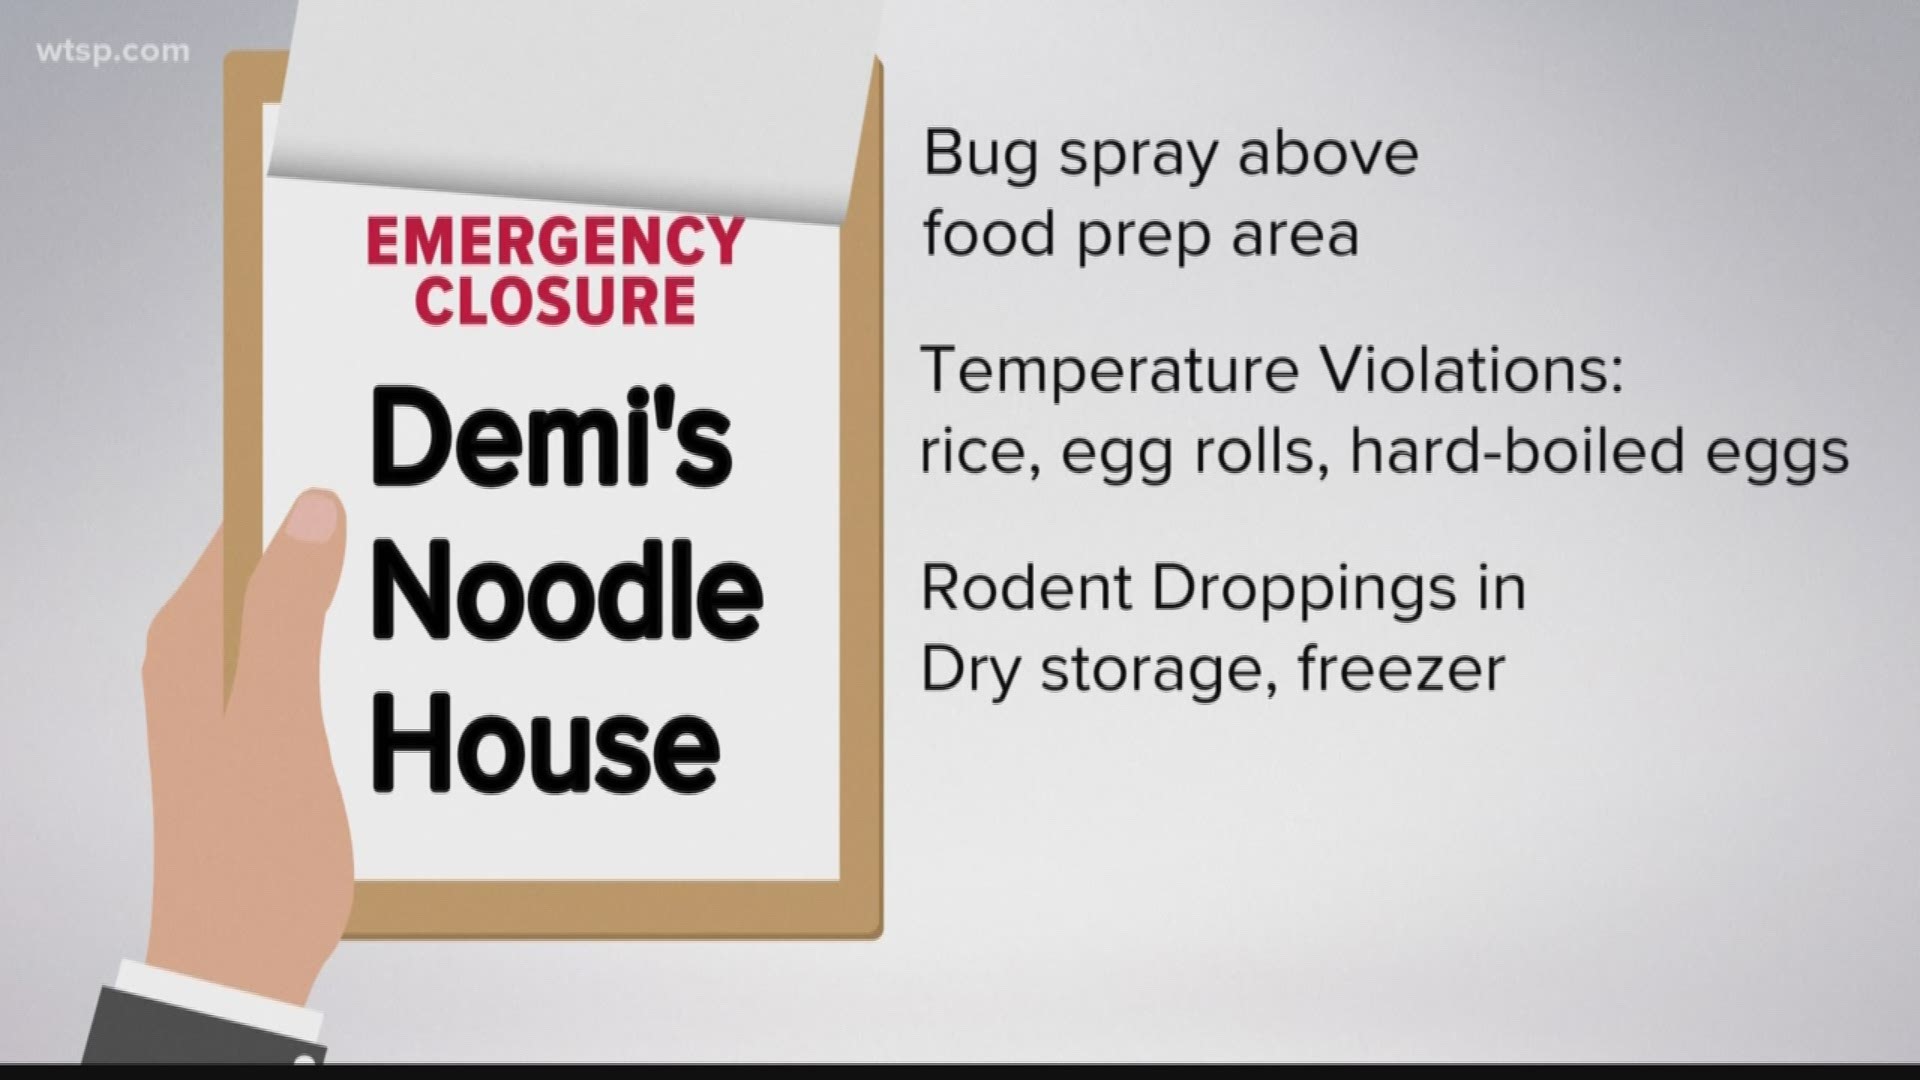 Demi's Noodle House had an emergency closure for health code violations.